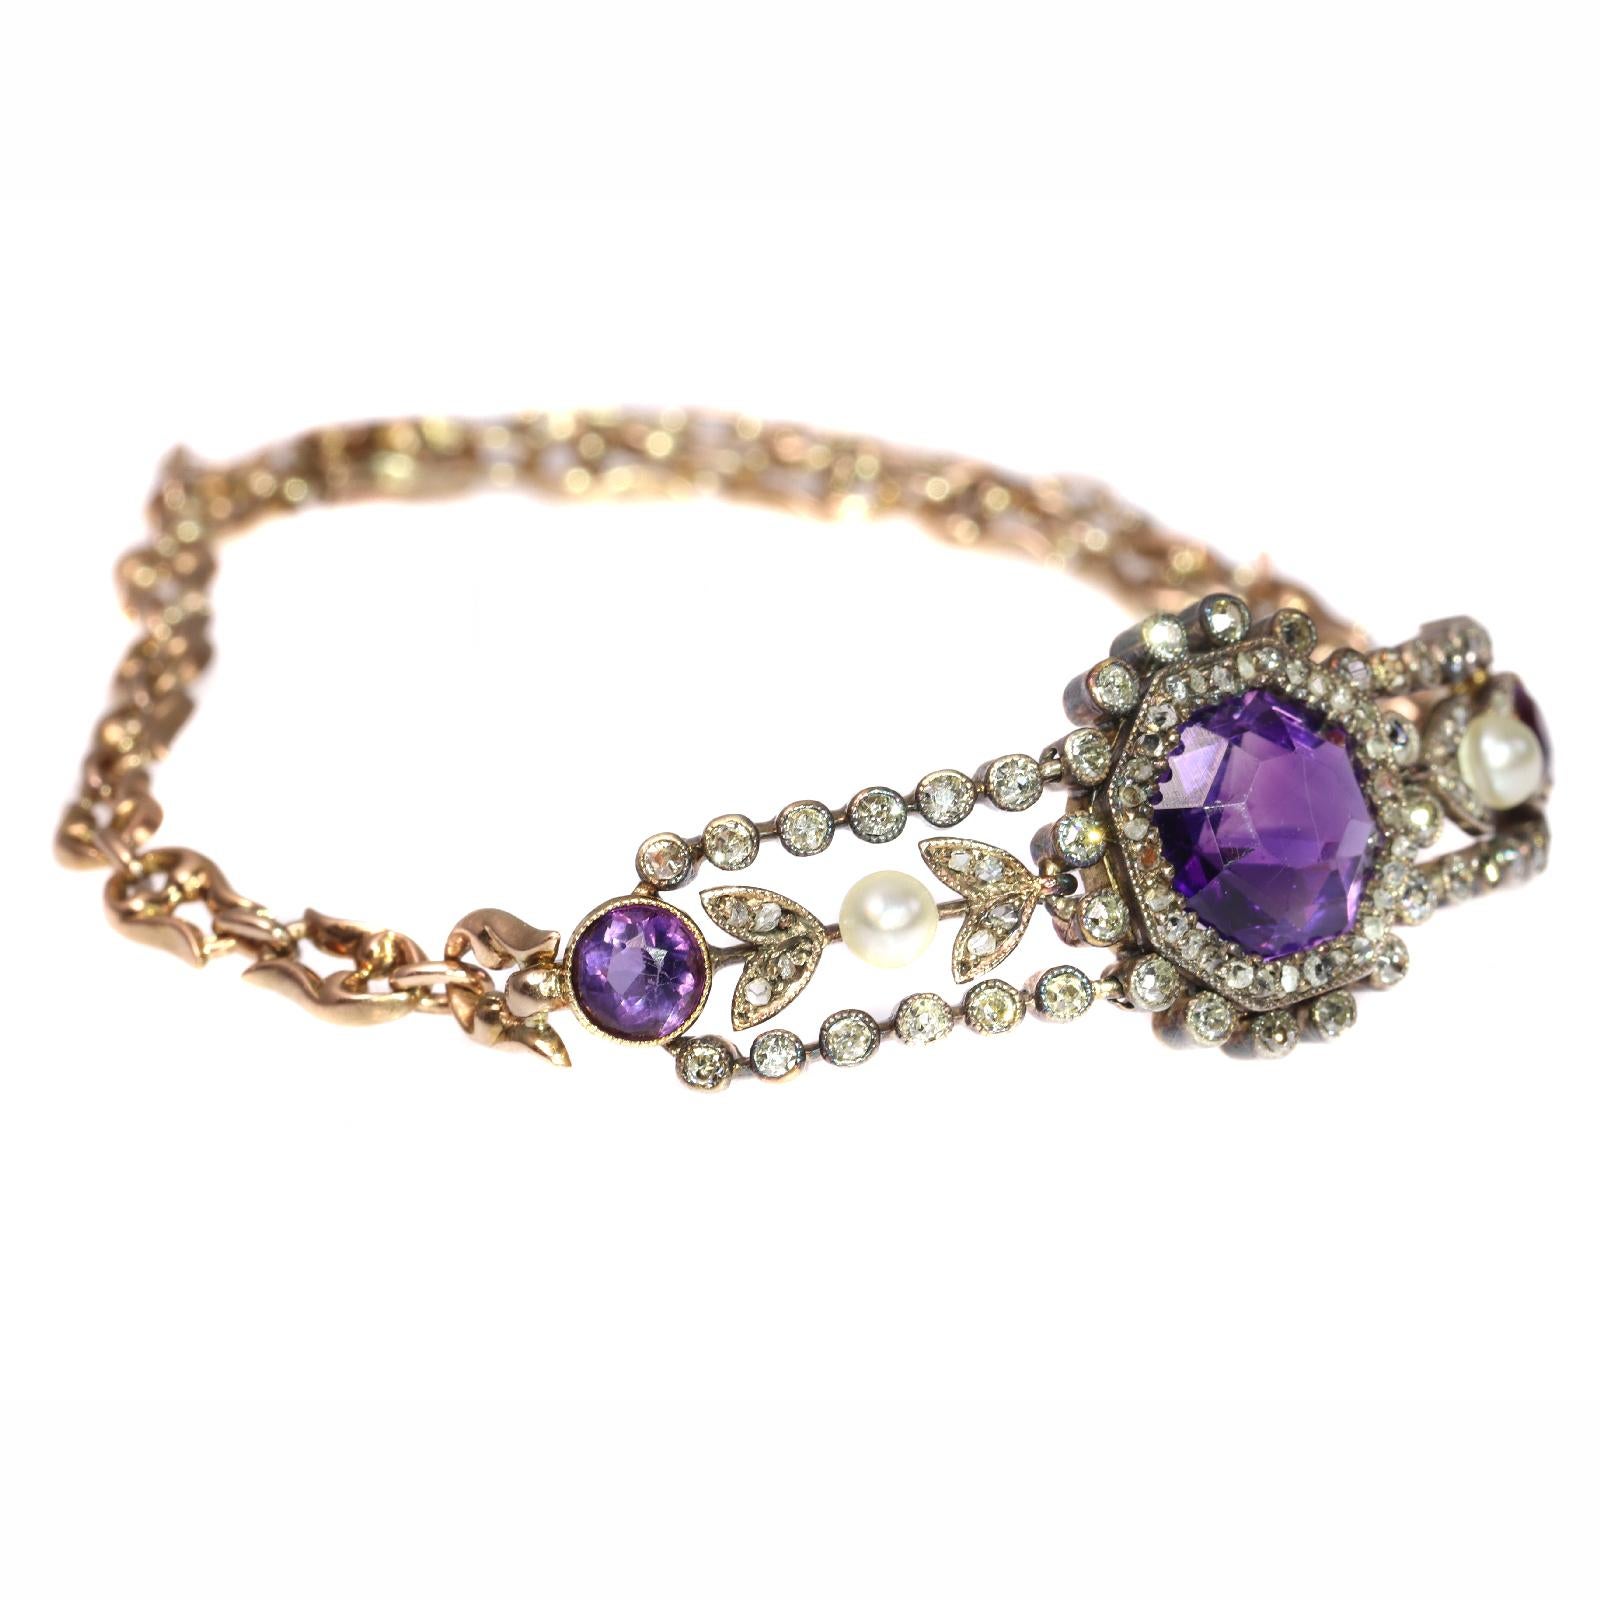 Charm Antique Gold Bracelet with Amethyst Diamonds and Pearls, 1860s In Excellent Condition For Sale In Antwerp, BE